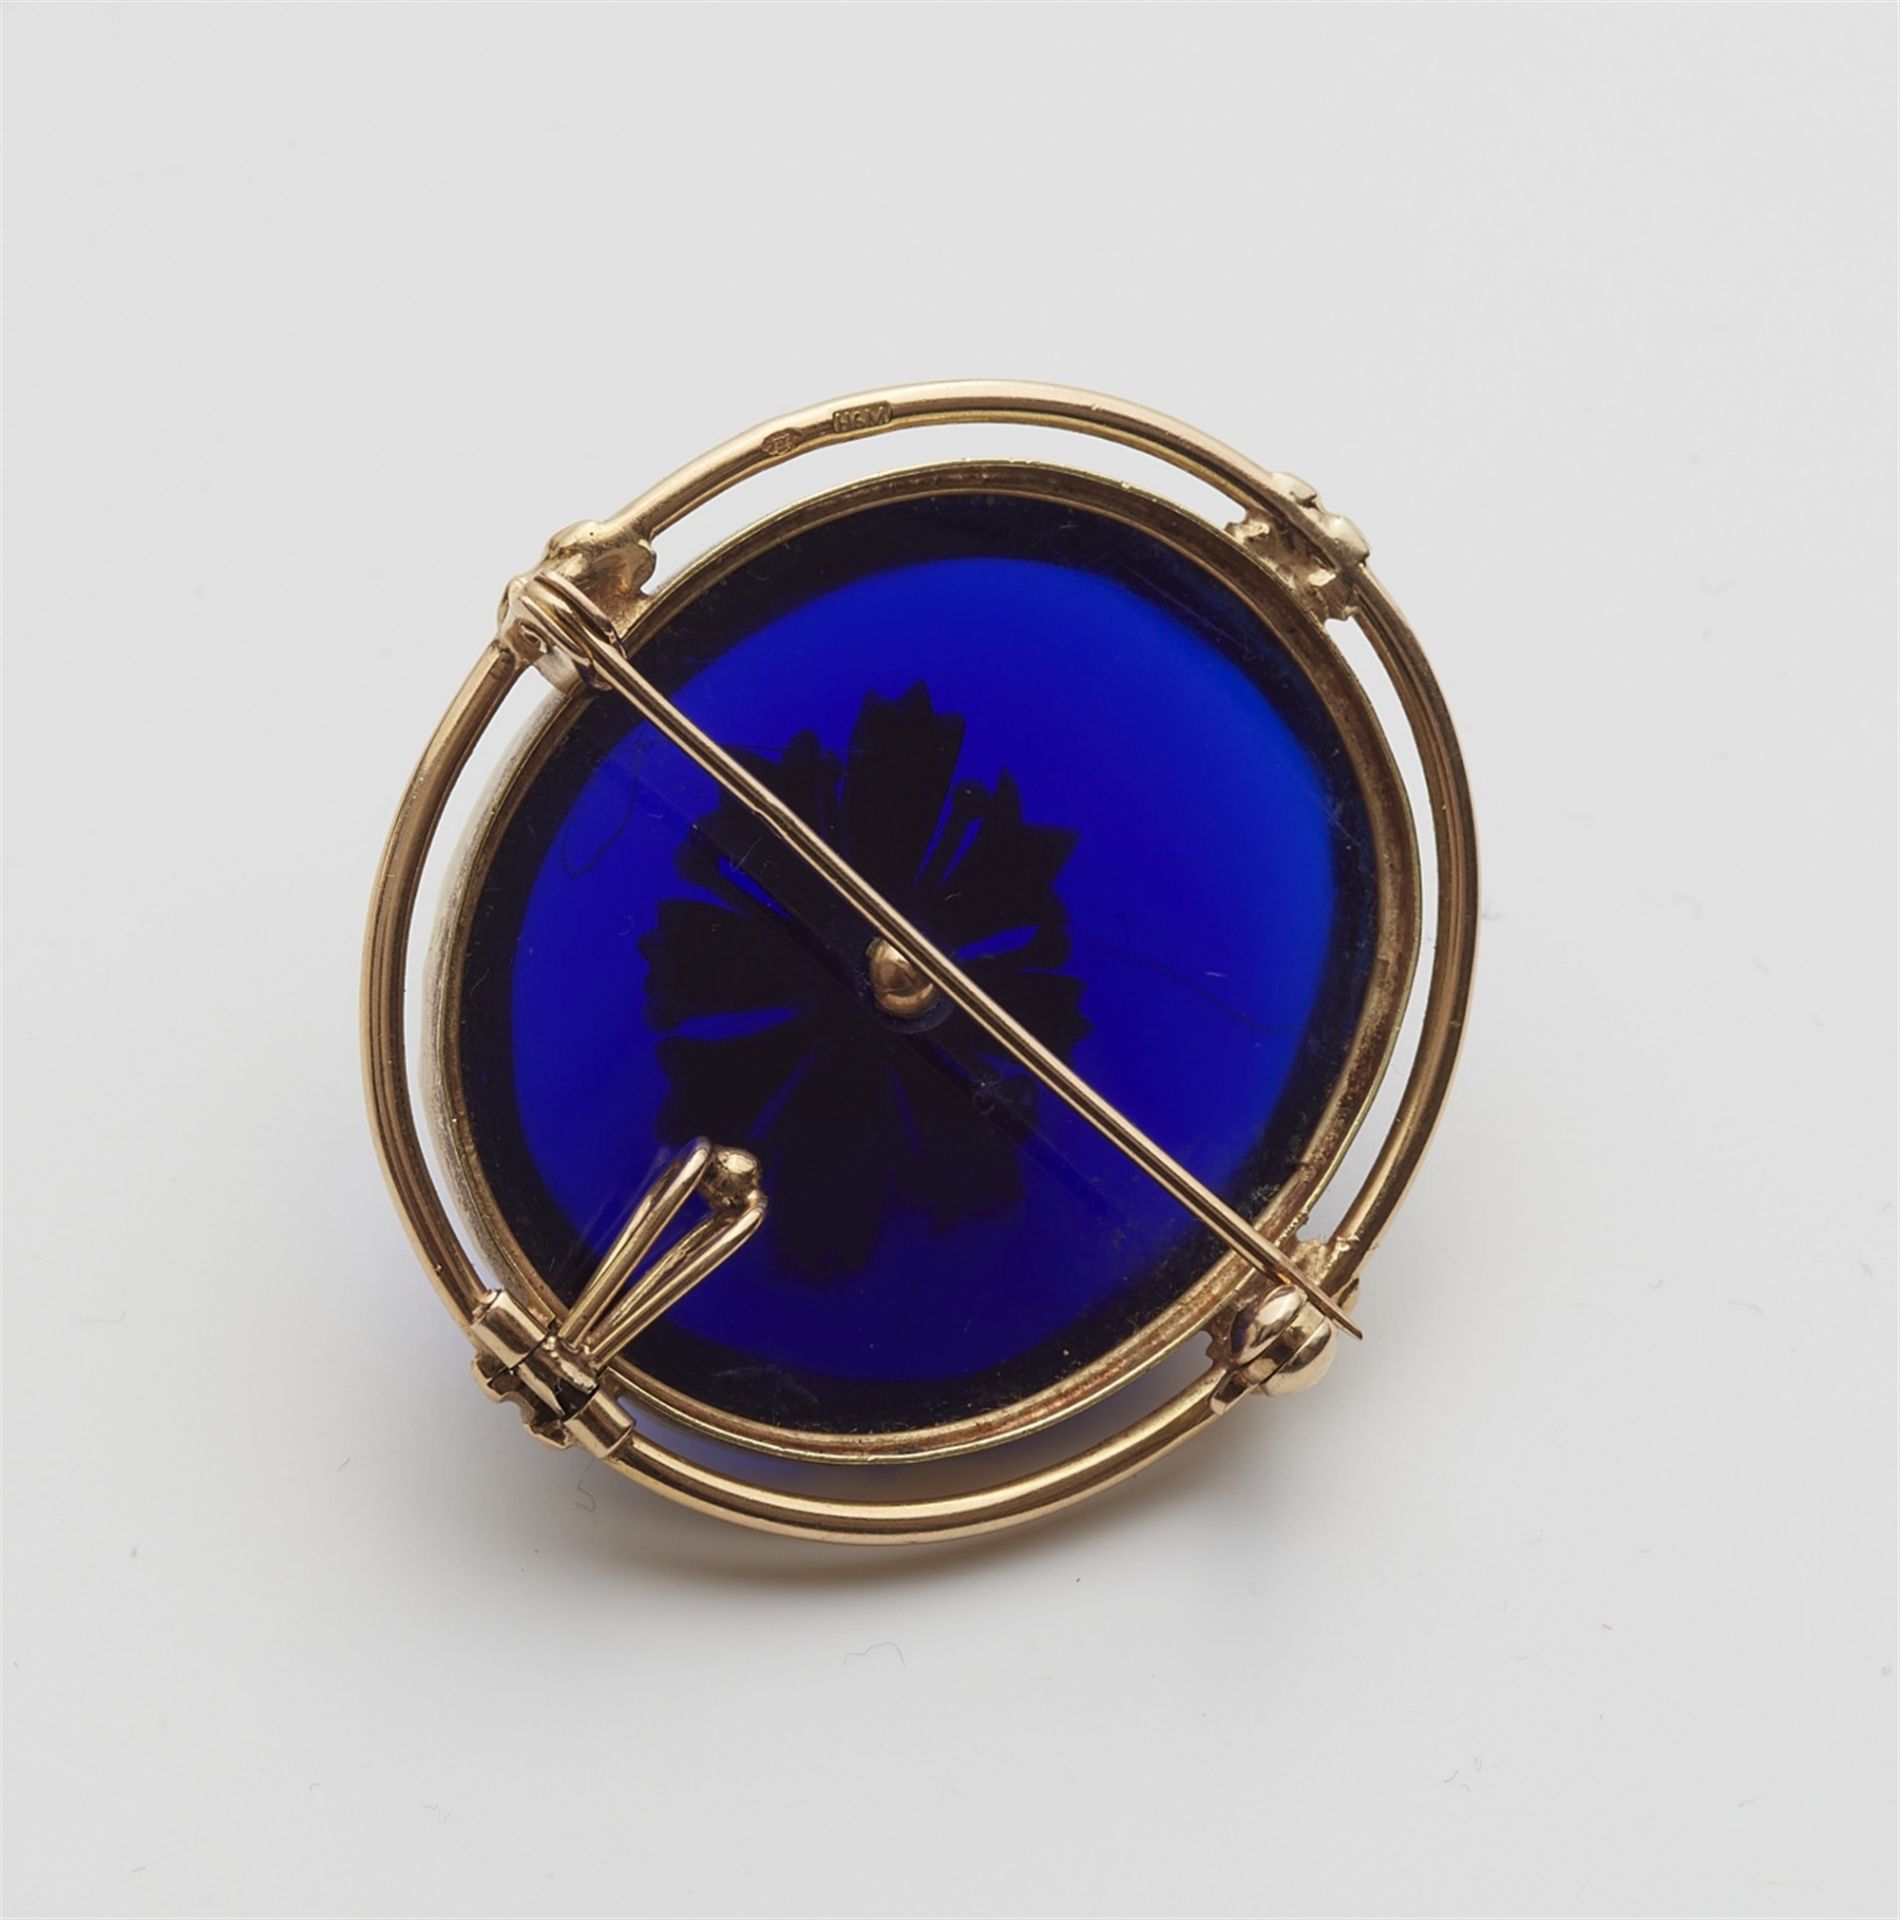 A 14k gold pendant brooch with a blue paste cabochon - Image 3 of 3